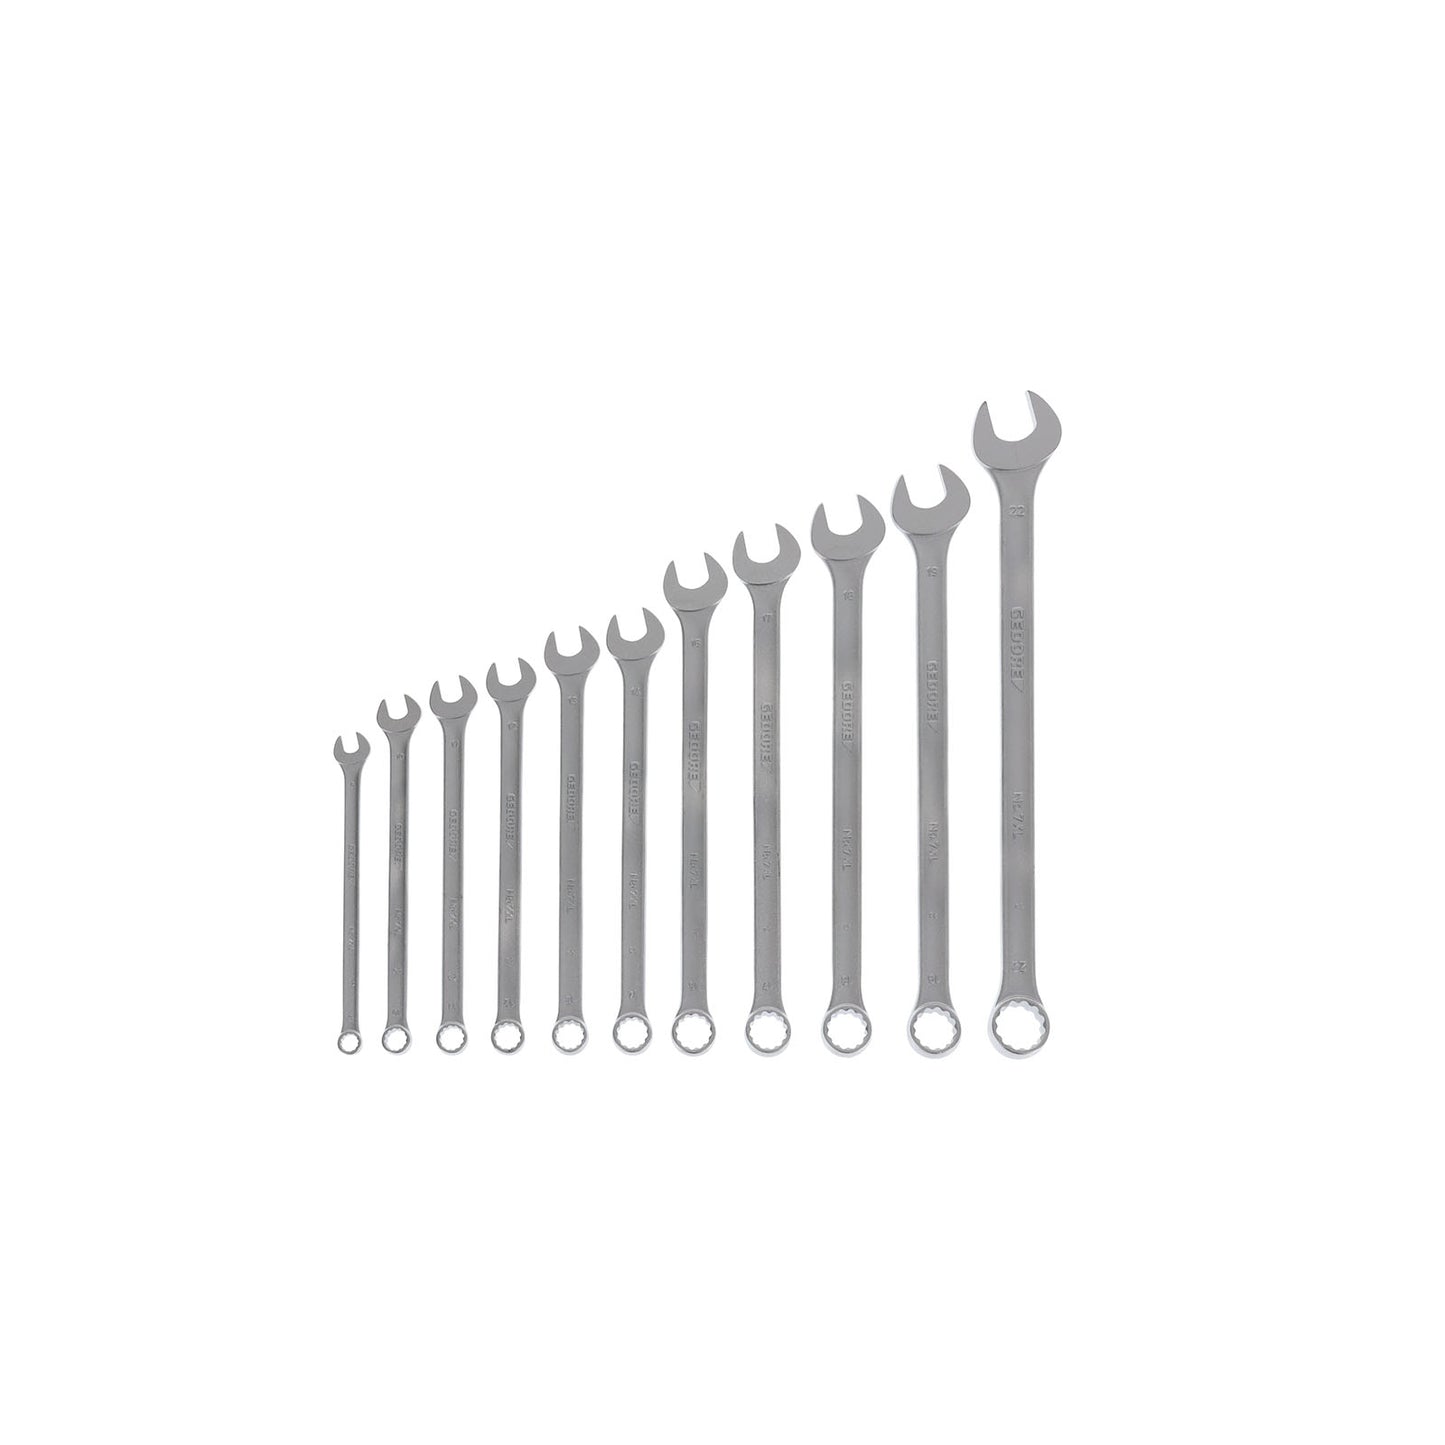 GEDORE 7 XL-0111 - Set of 11 XL Combination Wrenches (6104960)